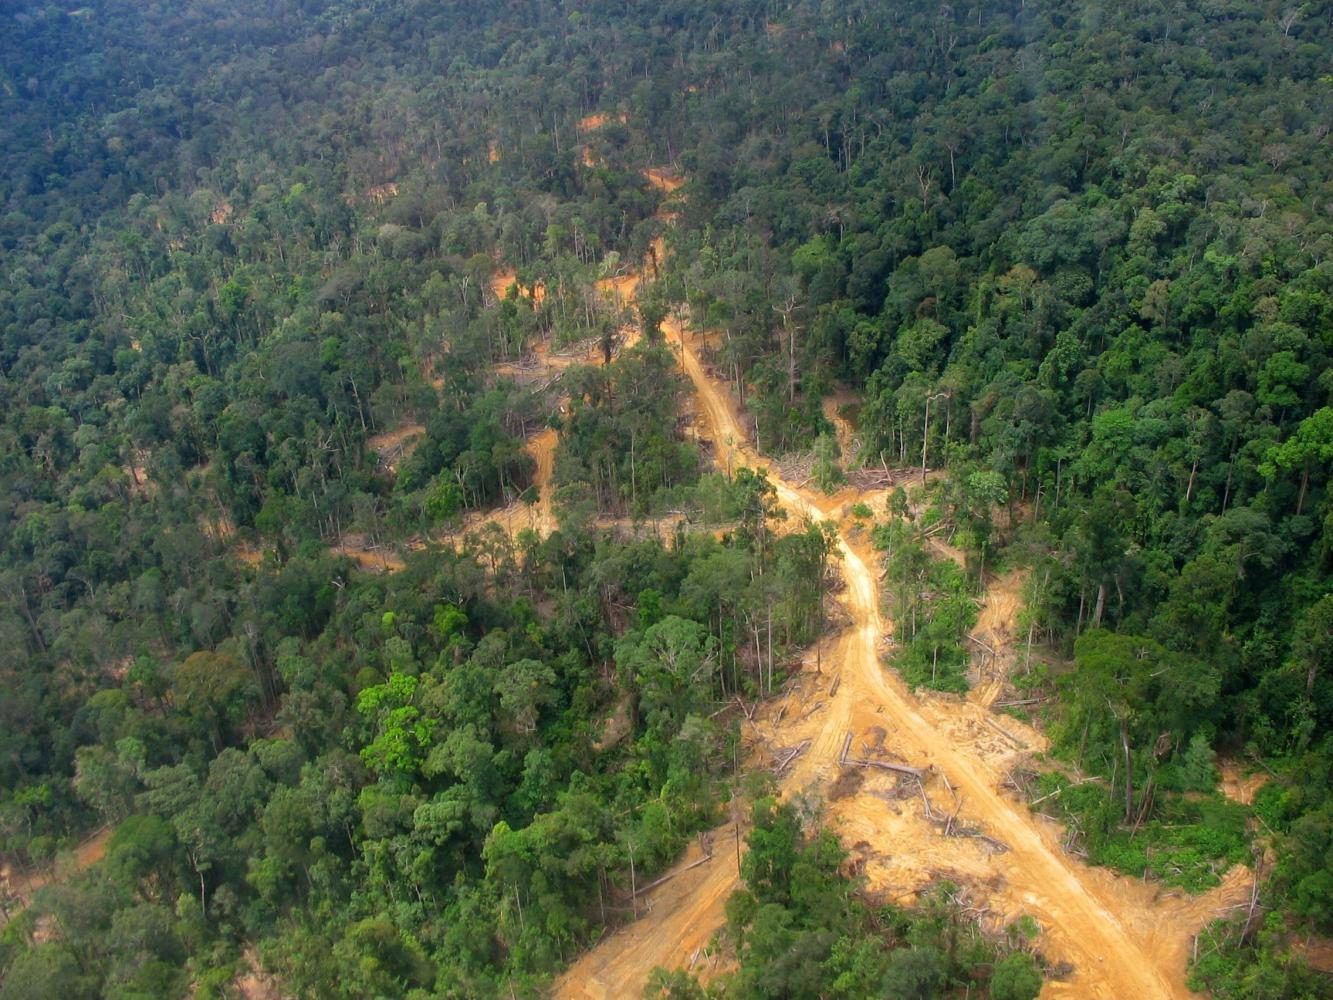 Running through the Amazon Rainforest, illegal logging roads are used to transport logs that benefit the lumber industry. Recent agriculture and lumber industry activity has resulted in the depletion of the Amazon Rainforest, leaving the world at risk for climate change.